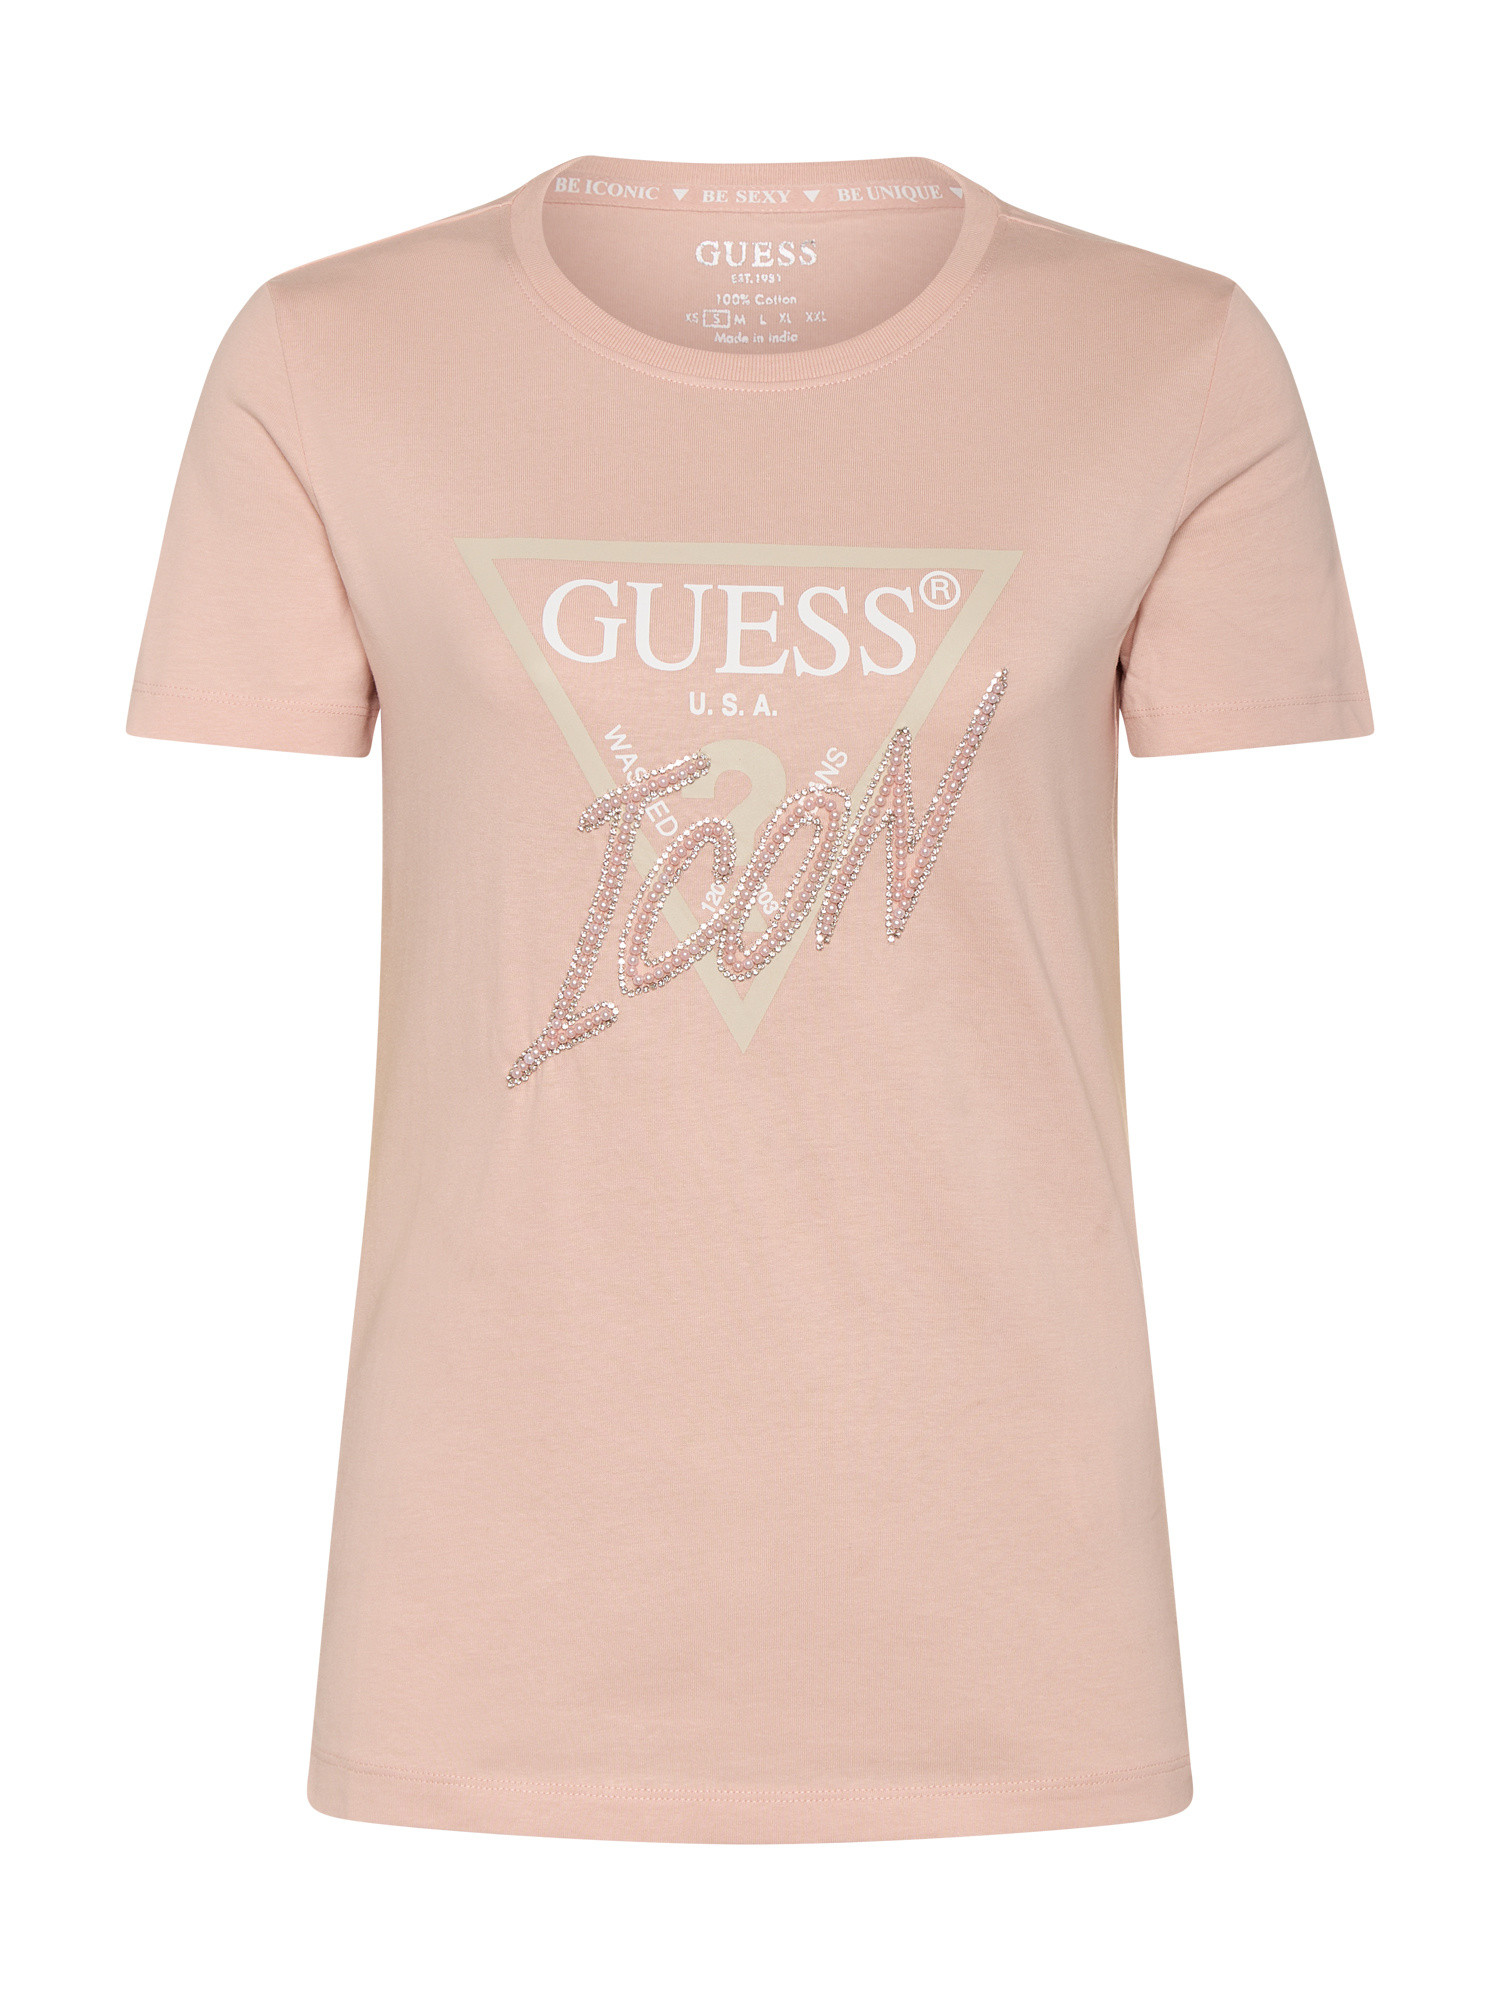 Guess - T-shirt con logo triangolo icon, Rosa, large image number 0